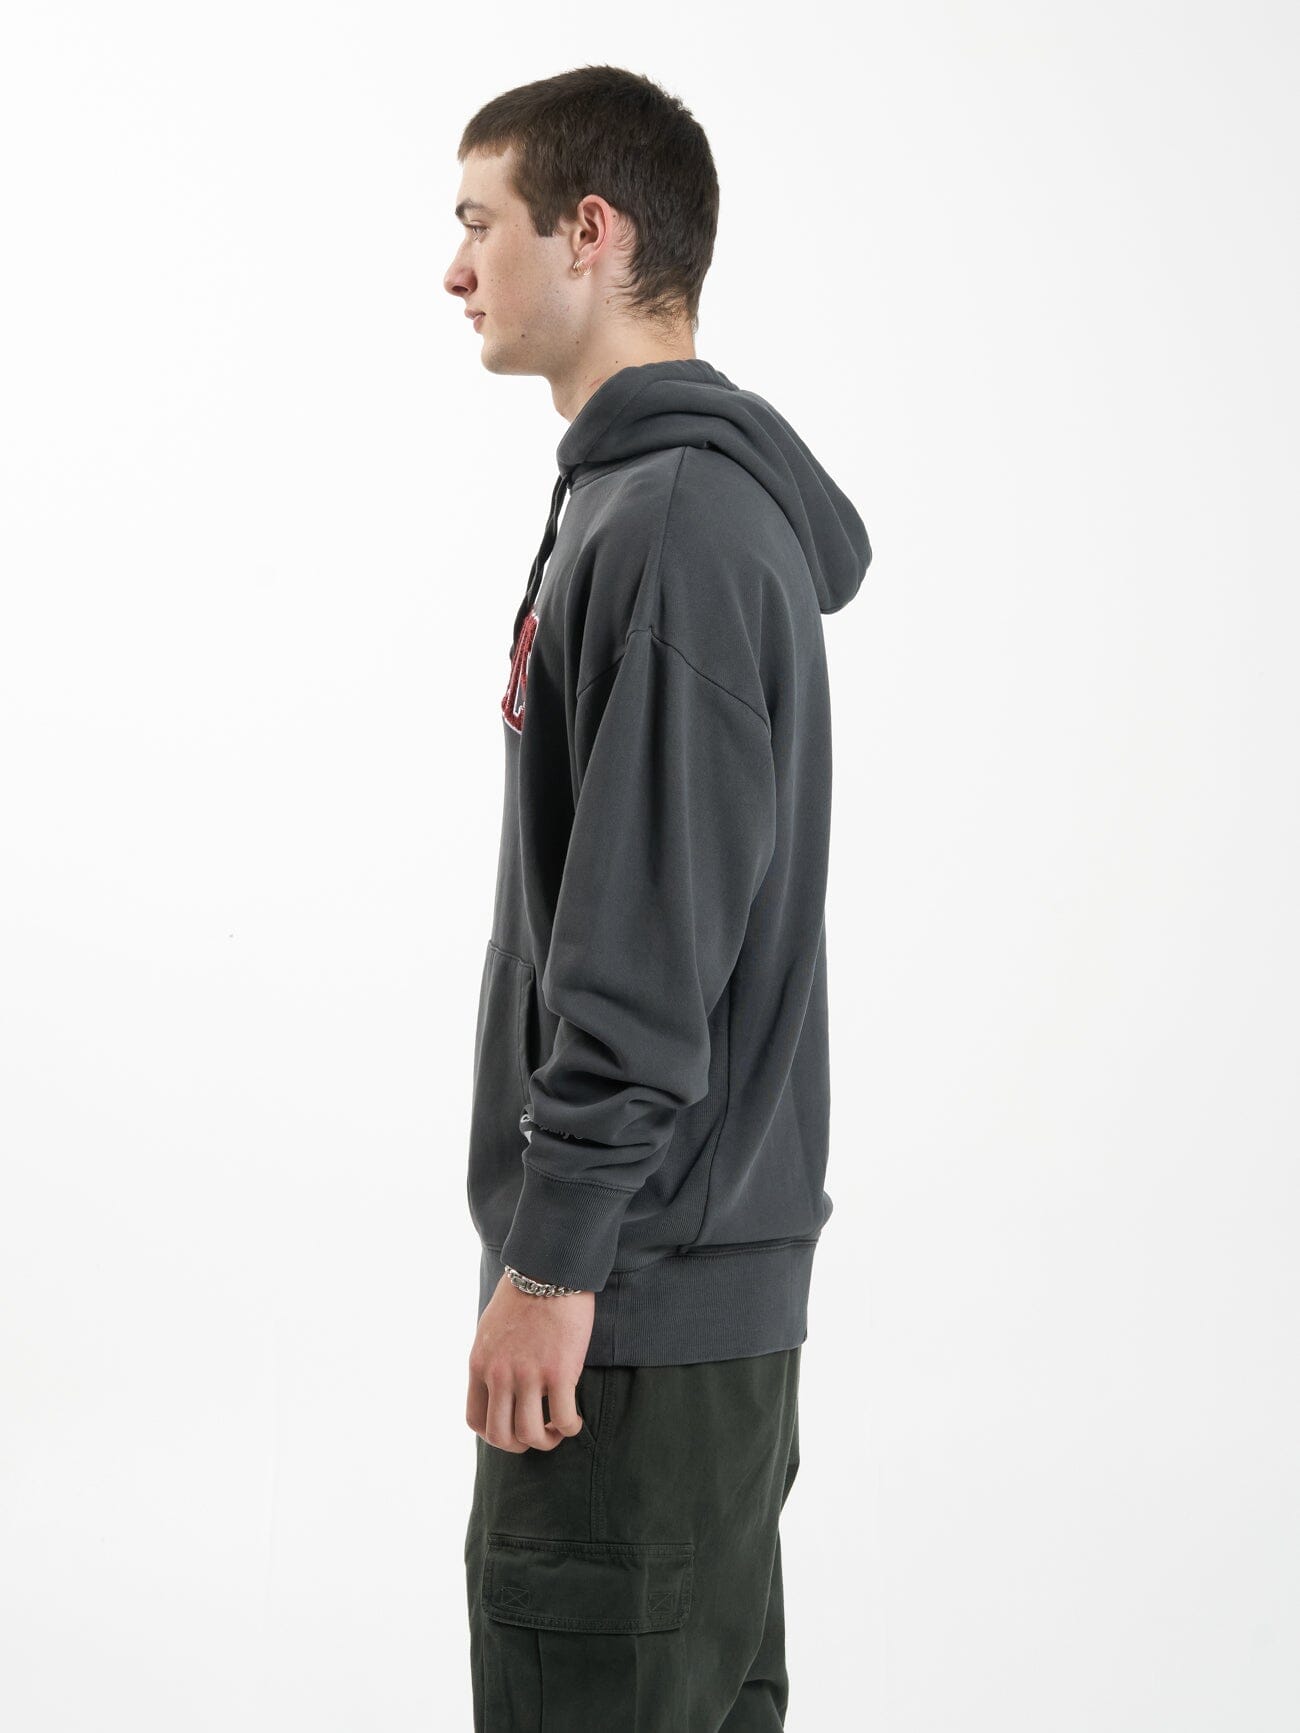 Stand Firm Slouch Pull On Hood - Merch Black